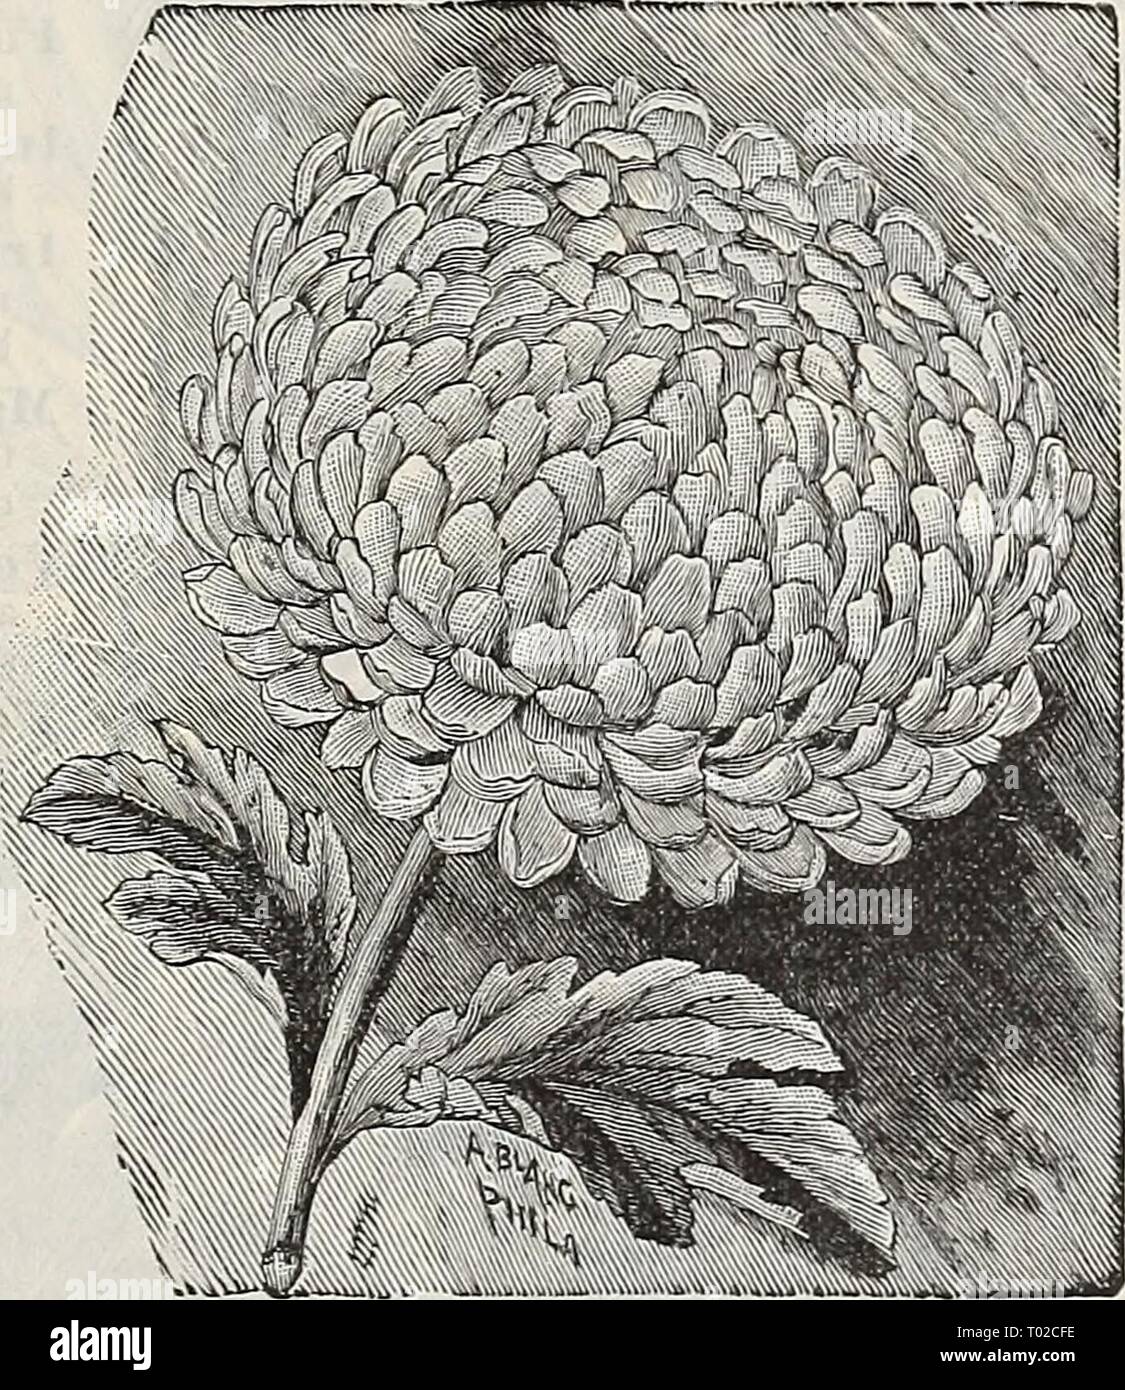 Dreer's garden calendar : 1898 . dreersgardencale1898henr Year: 1898  Ostrich Plume Chrysanthemum. Cissus Discolor. A beautiful climber for hanging 5asket&gt;, with mottled and marbled ;rimsoii and green foliage. (See rut.) 20 cts. each. Cestrum Parqui. (Night=blooining Jasamine.) A beautiful tender shrub of easy ;uitivation, with small greenish- vhite flowers, of delightful fra- grance, which is dispensed during he night only. 15 cents each. Clerodendron Balfouri. A beautiful greenhouse climber, md admirably suited for house ;ulture ; flowering most profusely iviih bright scarlet flowers, env Stock Photo